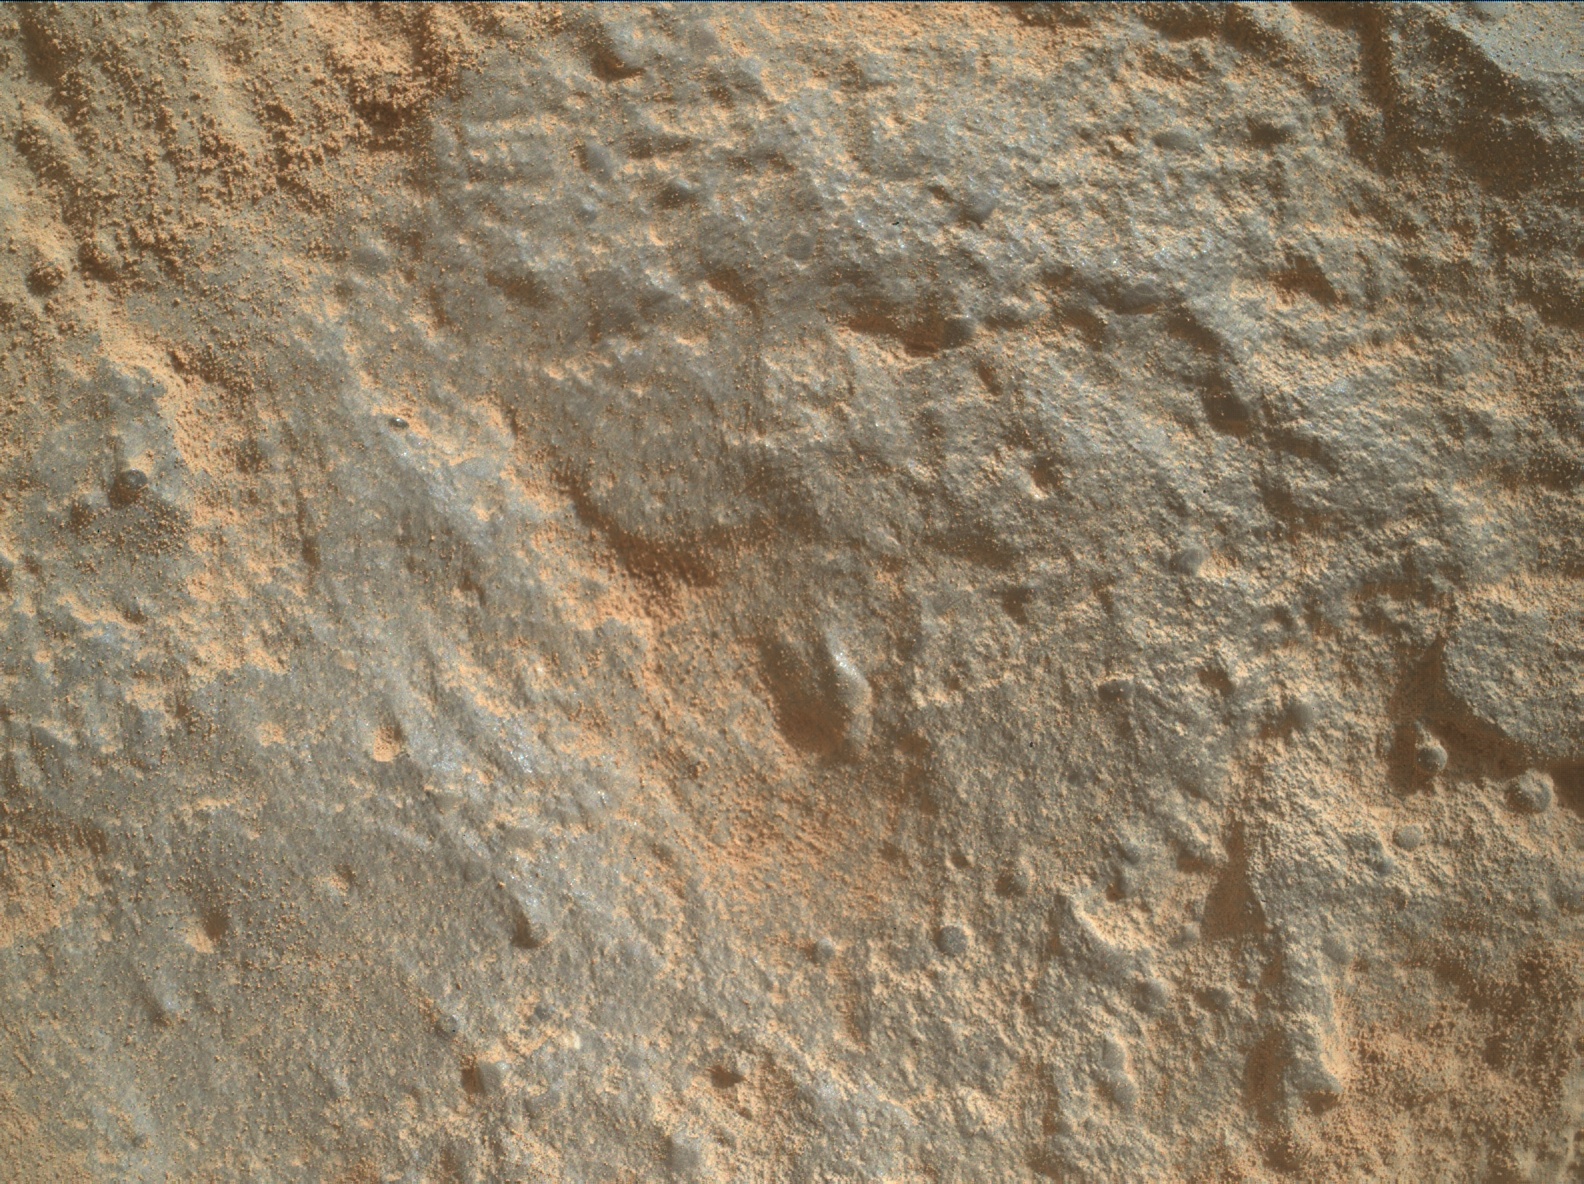 Nasa's Mars rover Curiosity acquired this image using its Mars Hand Lens Imager (MAHLI) on Sol 3442